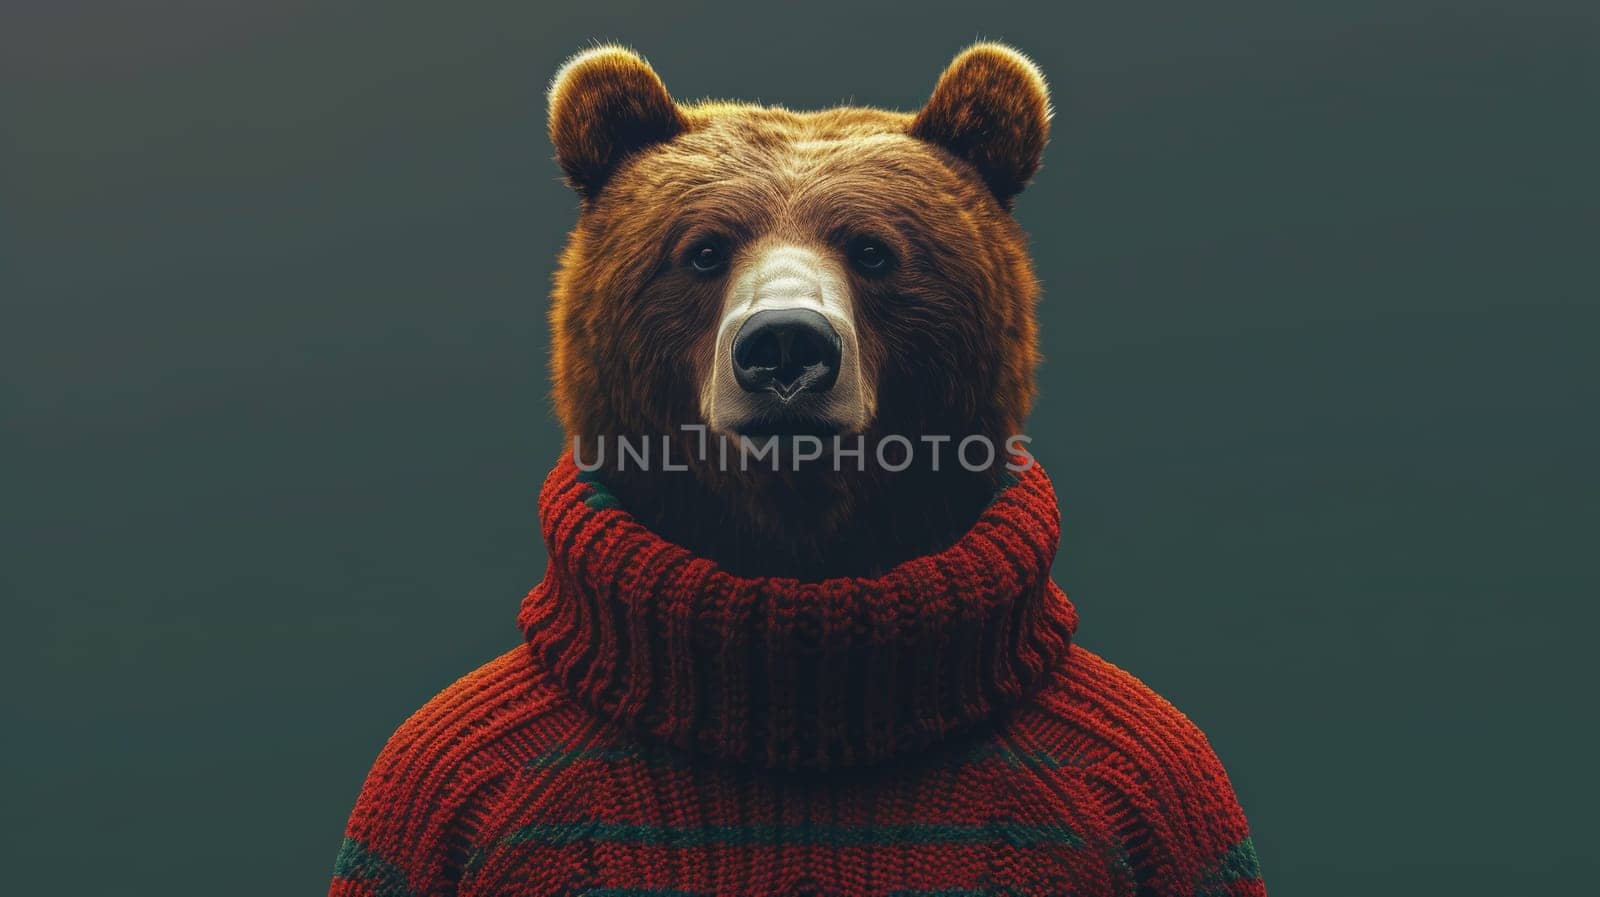 A bear wearing a sweater with the face of an animal